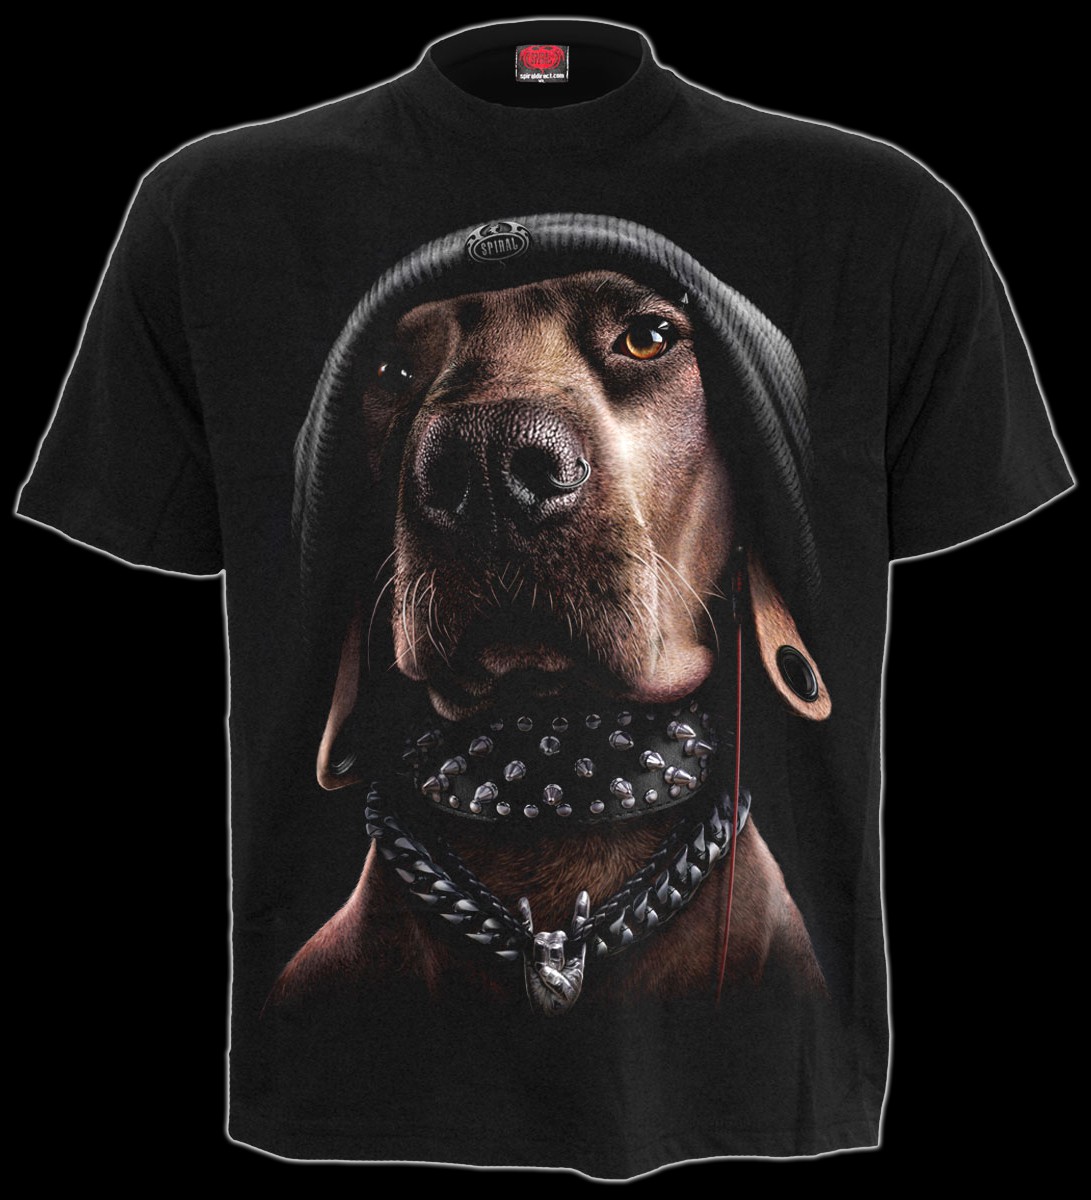 Dawg the Metal Dog - Gothic T-Shirt